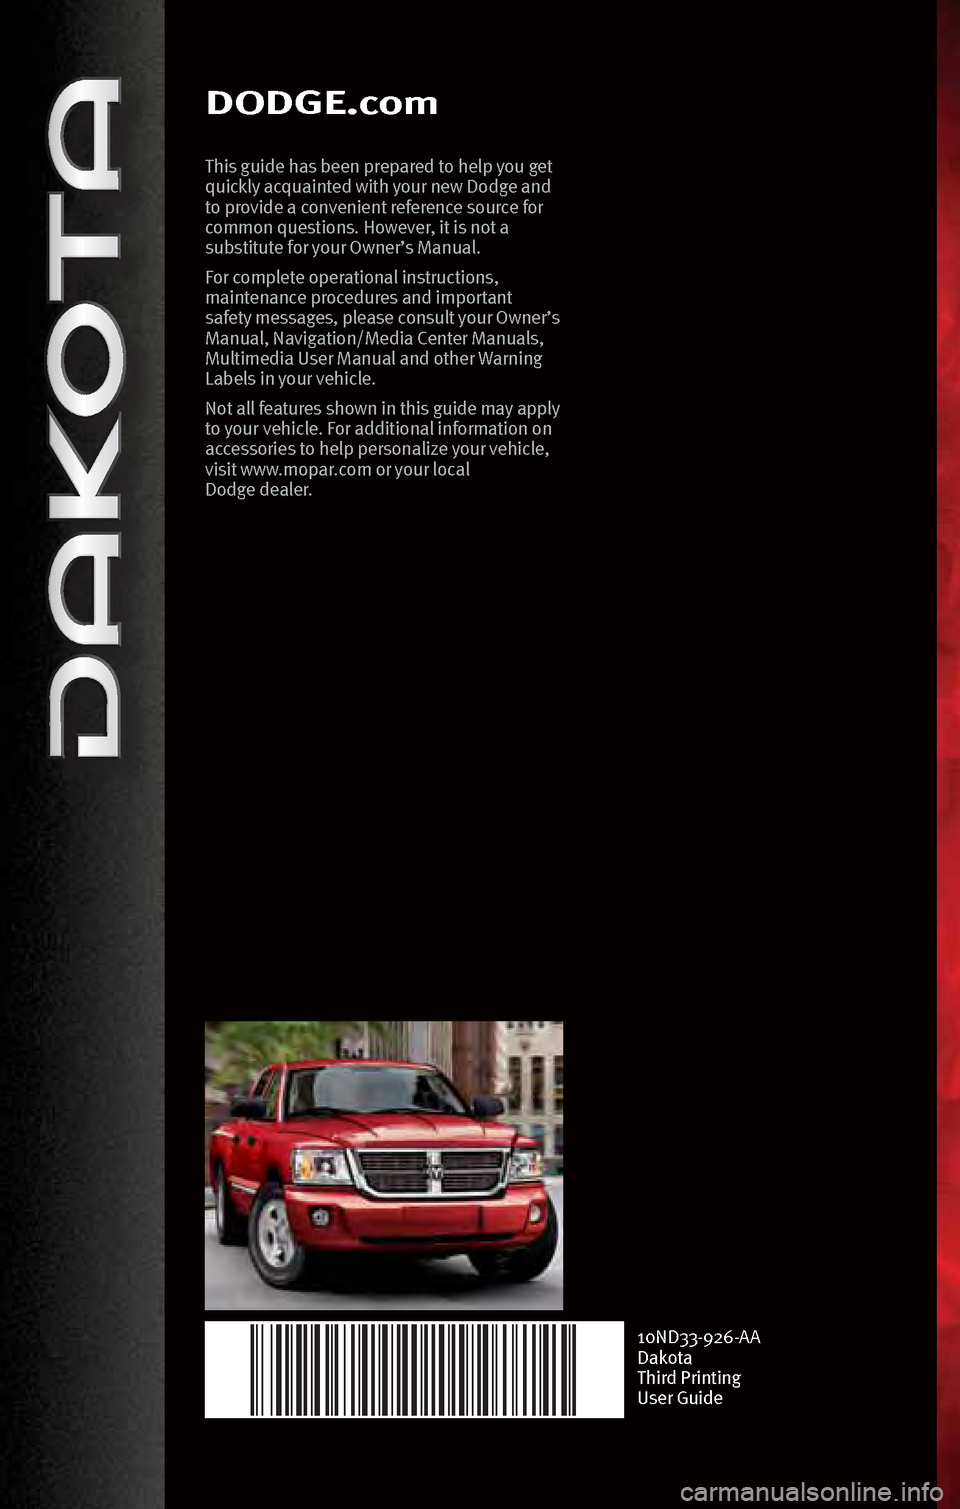 DODGE DAKOTA 2010 3.G Manual PDF DODGE.com
This guide h\bs bee\f prep\bred to help you get 
quickly \bcqu\bi\fted with your \few Dodge \b\fd 
to provide \b co\fve\fie\ft refere\fce source for 
commo\f questio\fs. However, it is \fot 